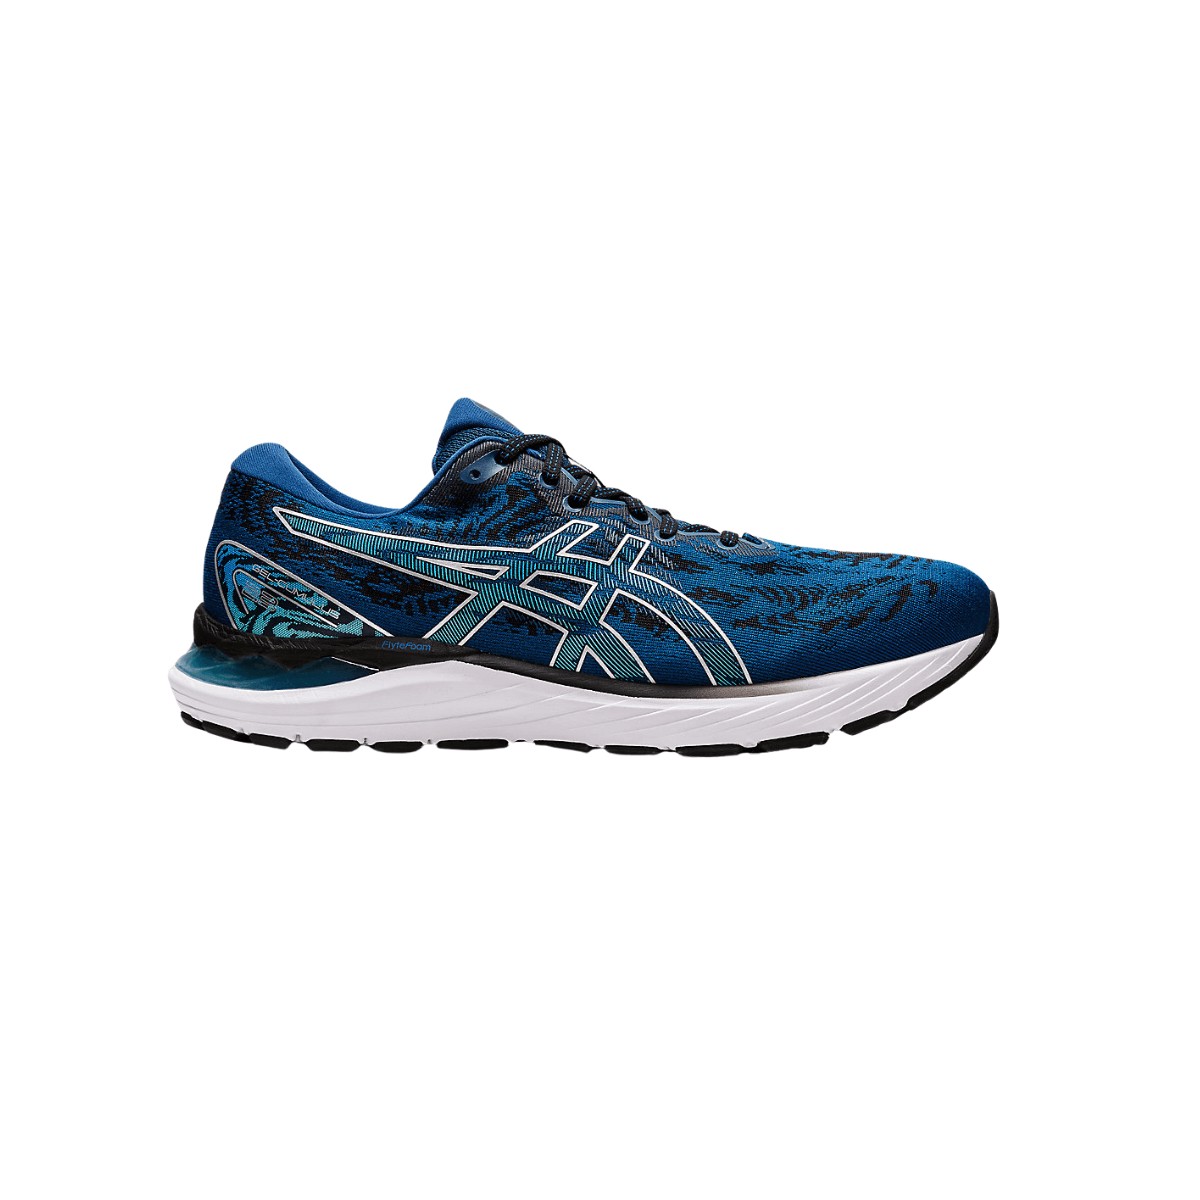 Buy Asics Gel Cumulus 23 Shoes at the Best Price